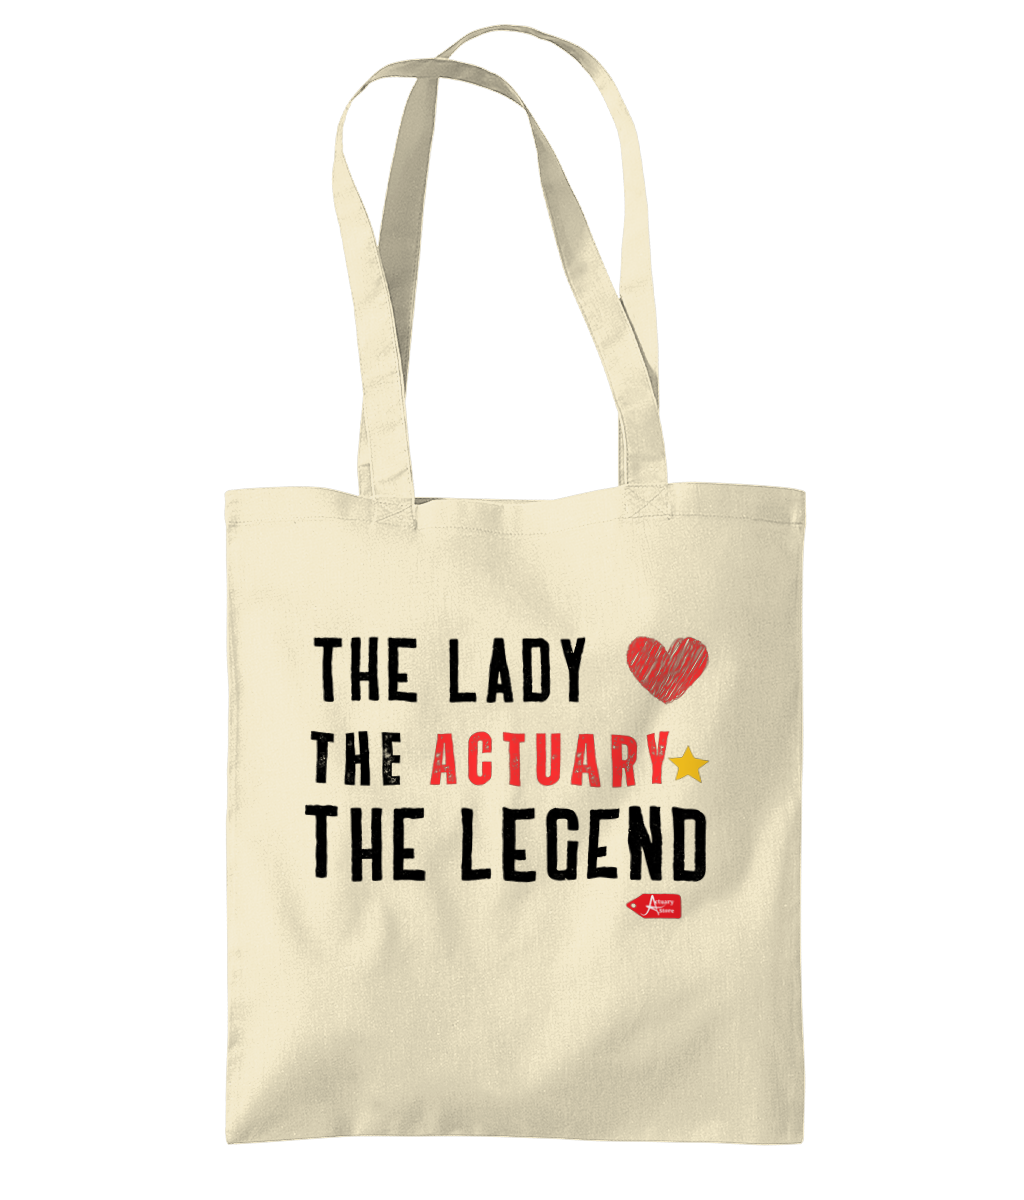 Tote Bag The Lady The Actuary The Legend Heart Star